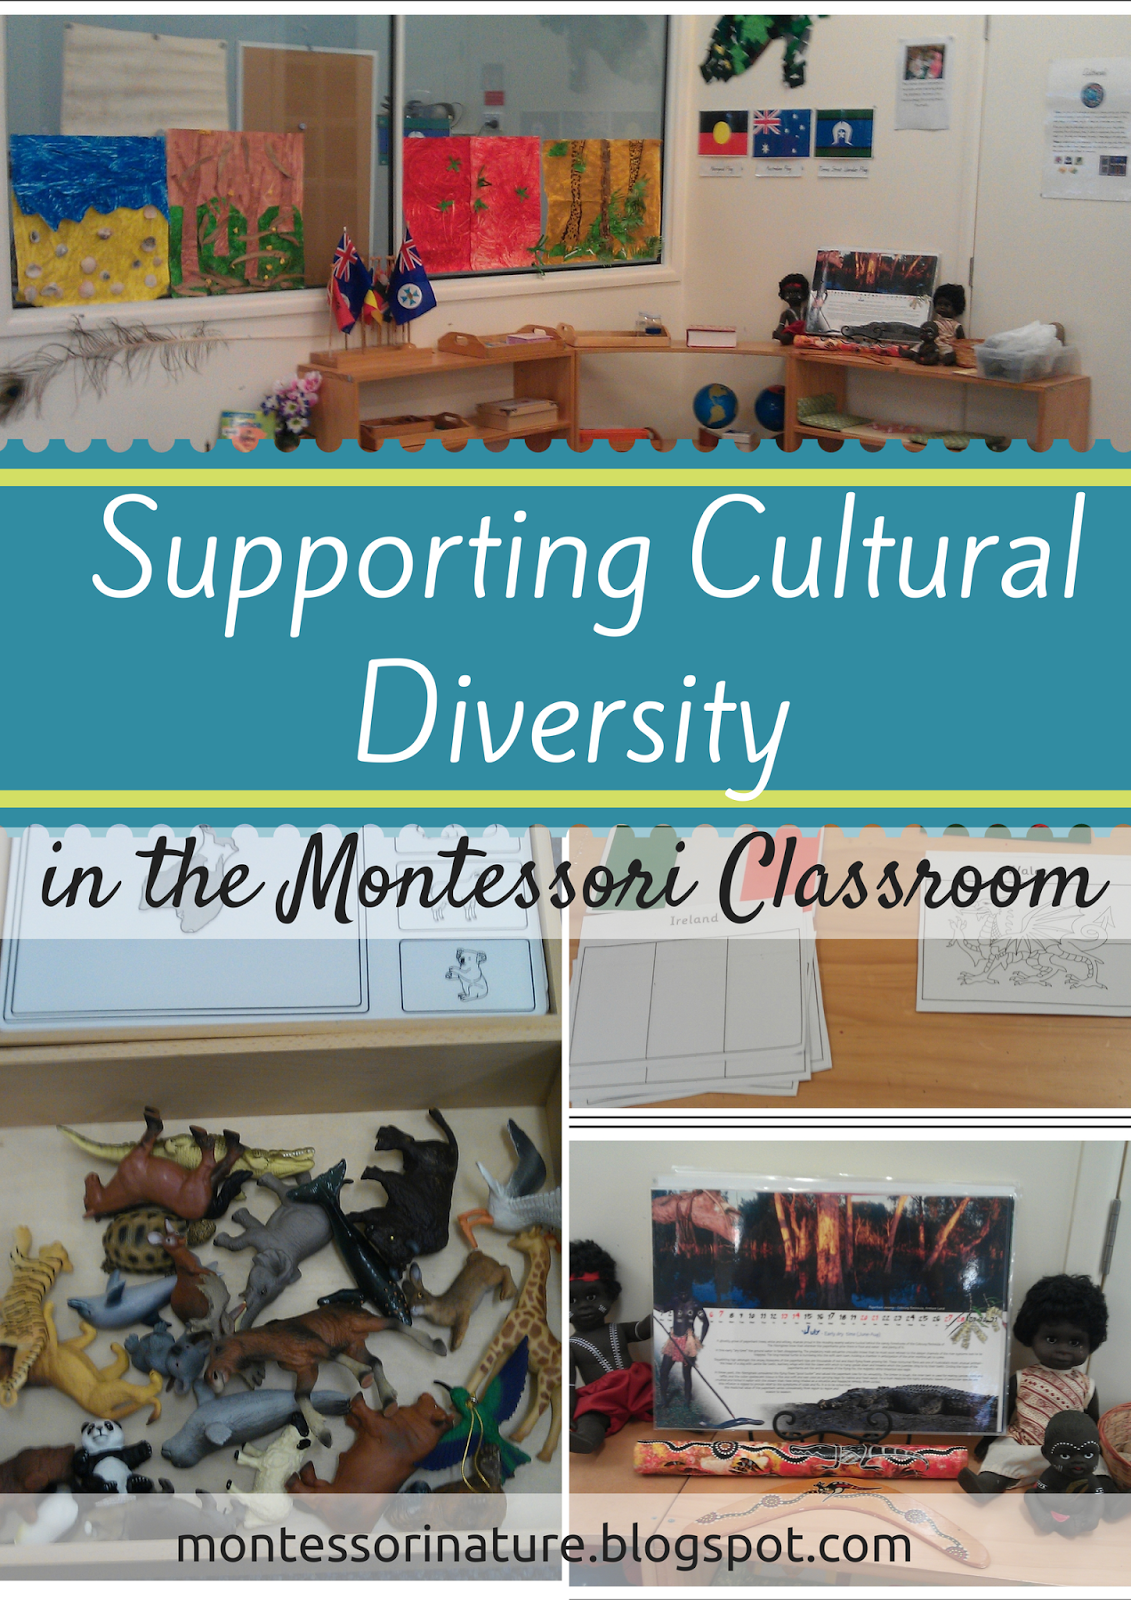 Download this Supporting Cultural Diversity The Montessori Classroom picture